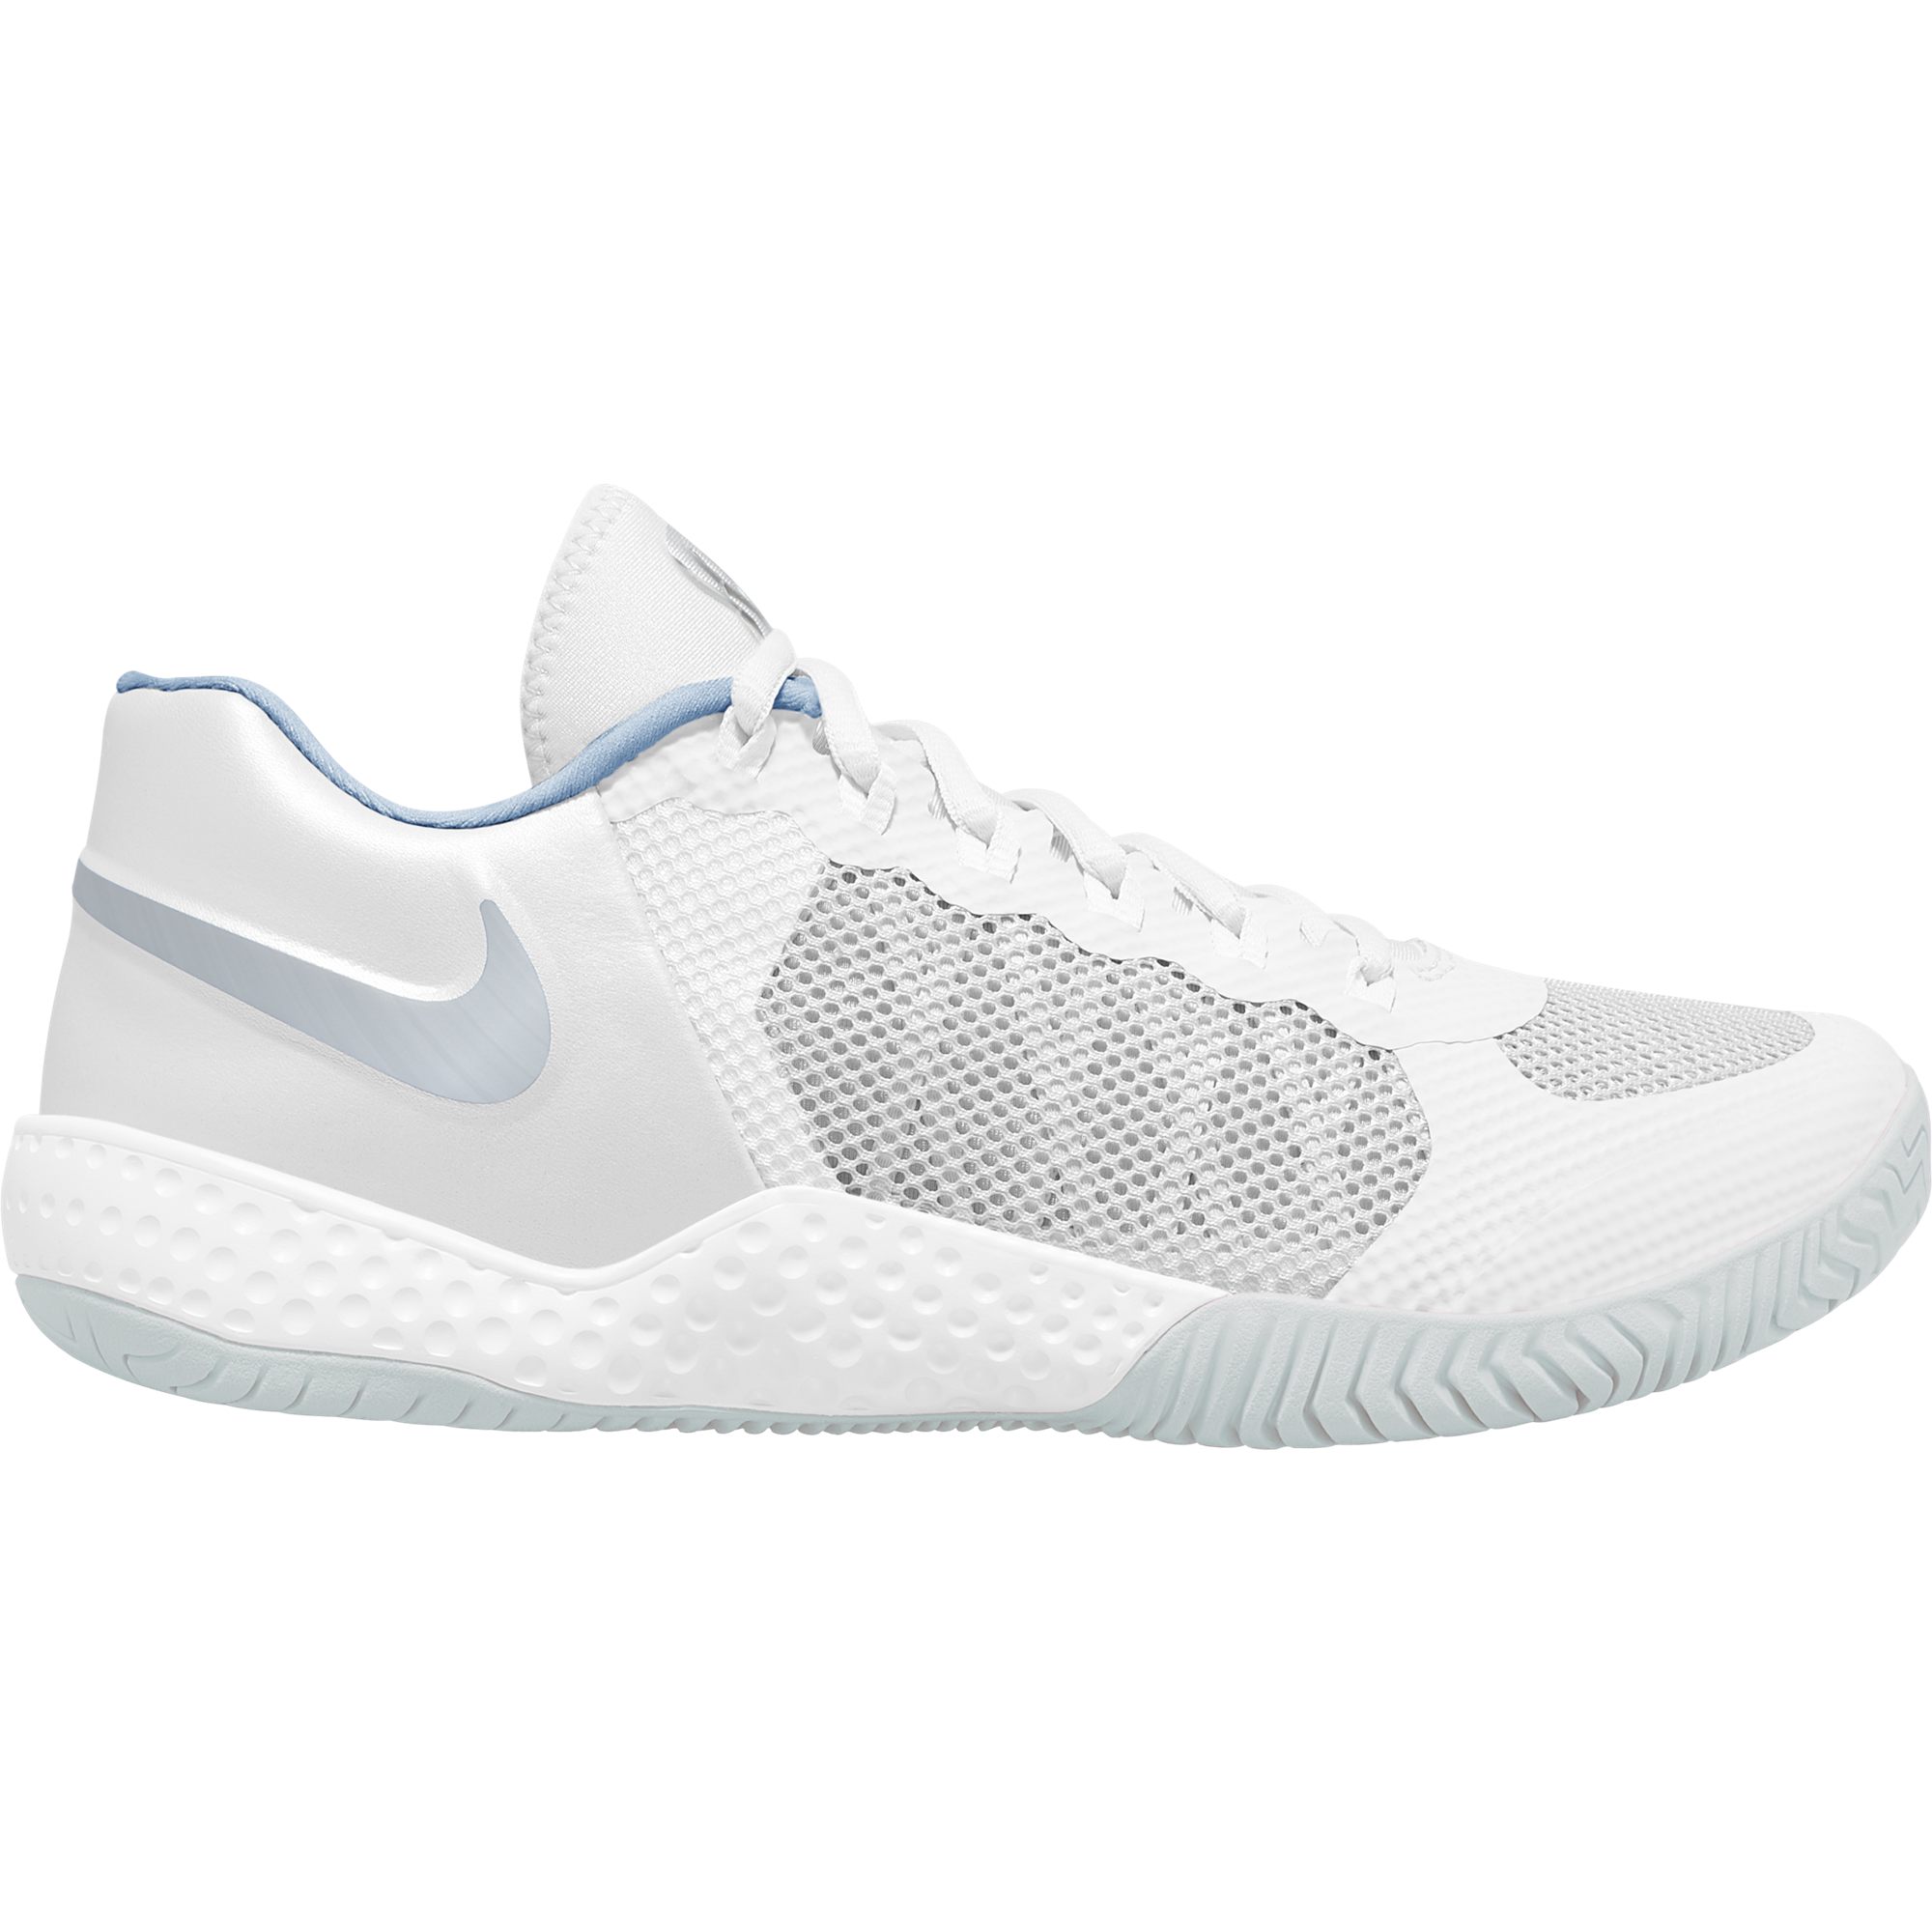 nike court flare tennis shoes